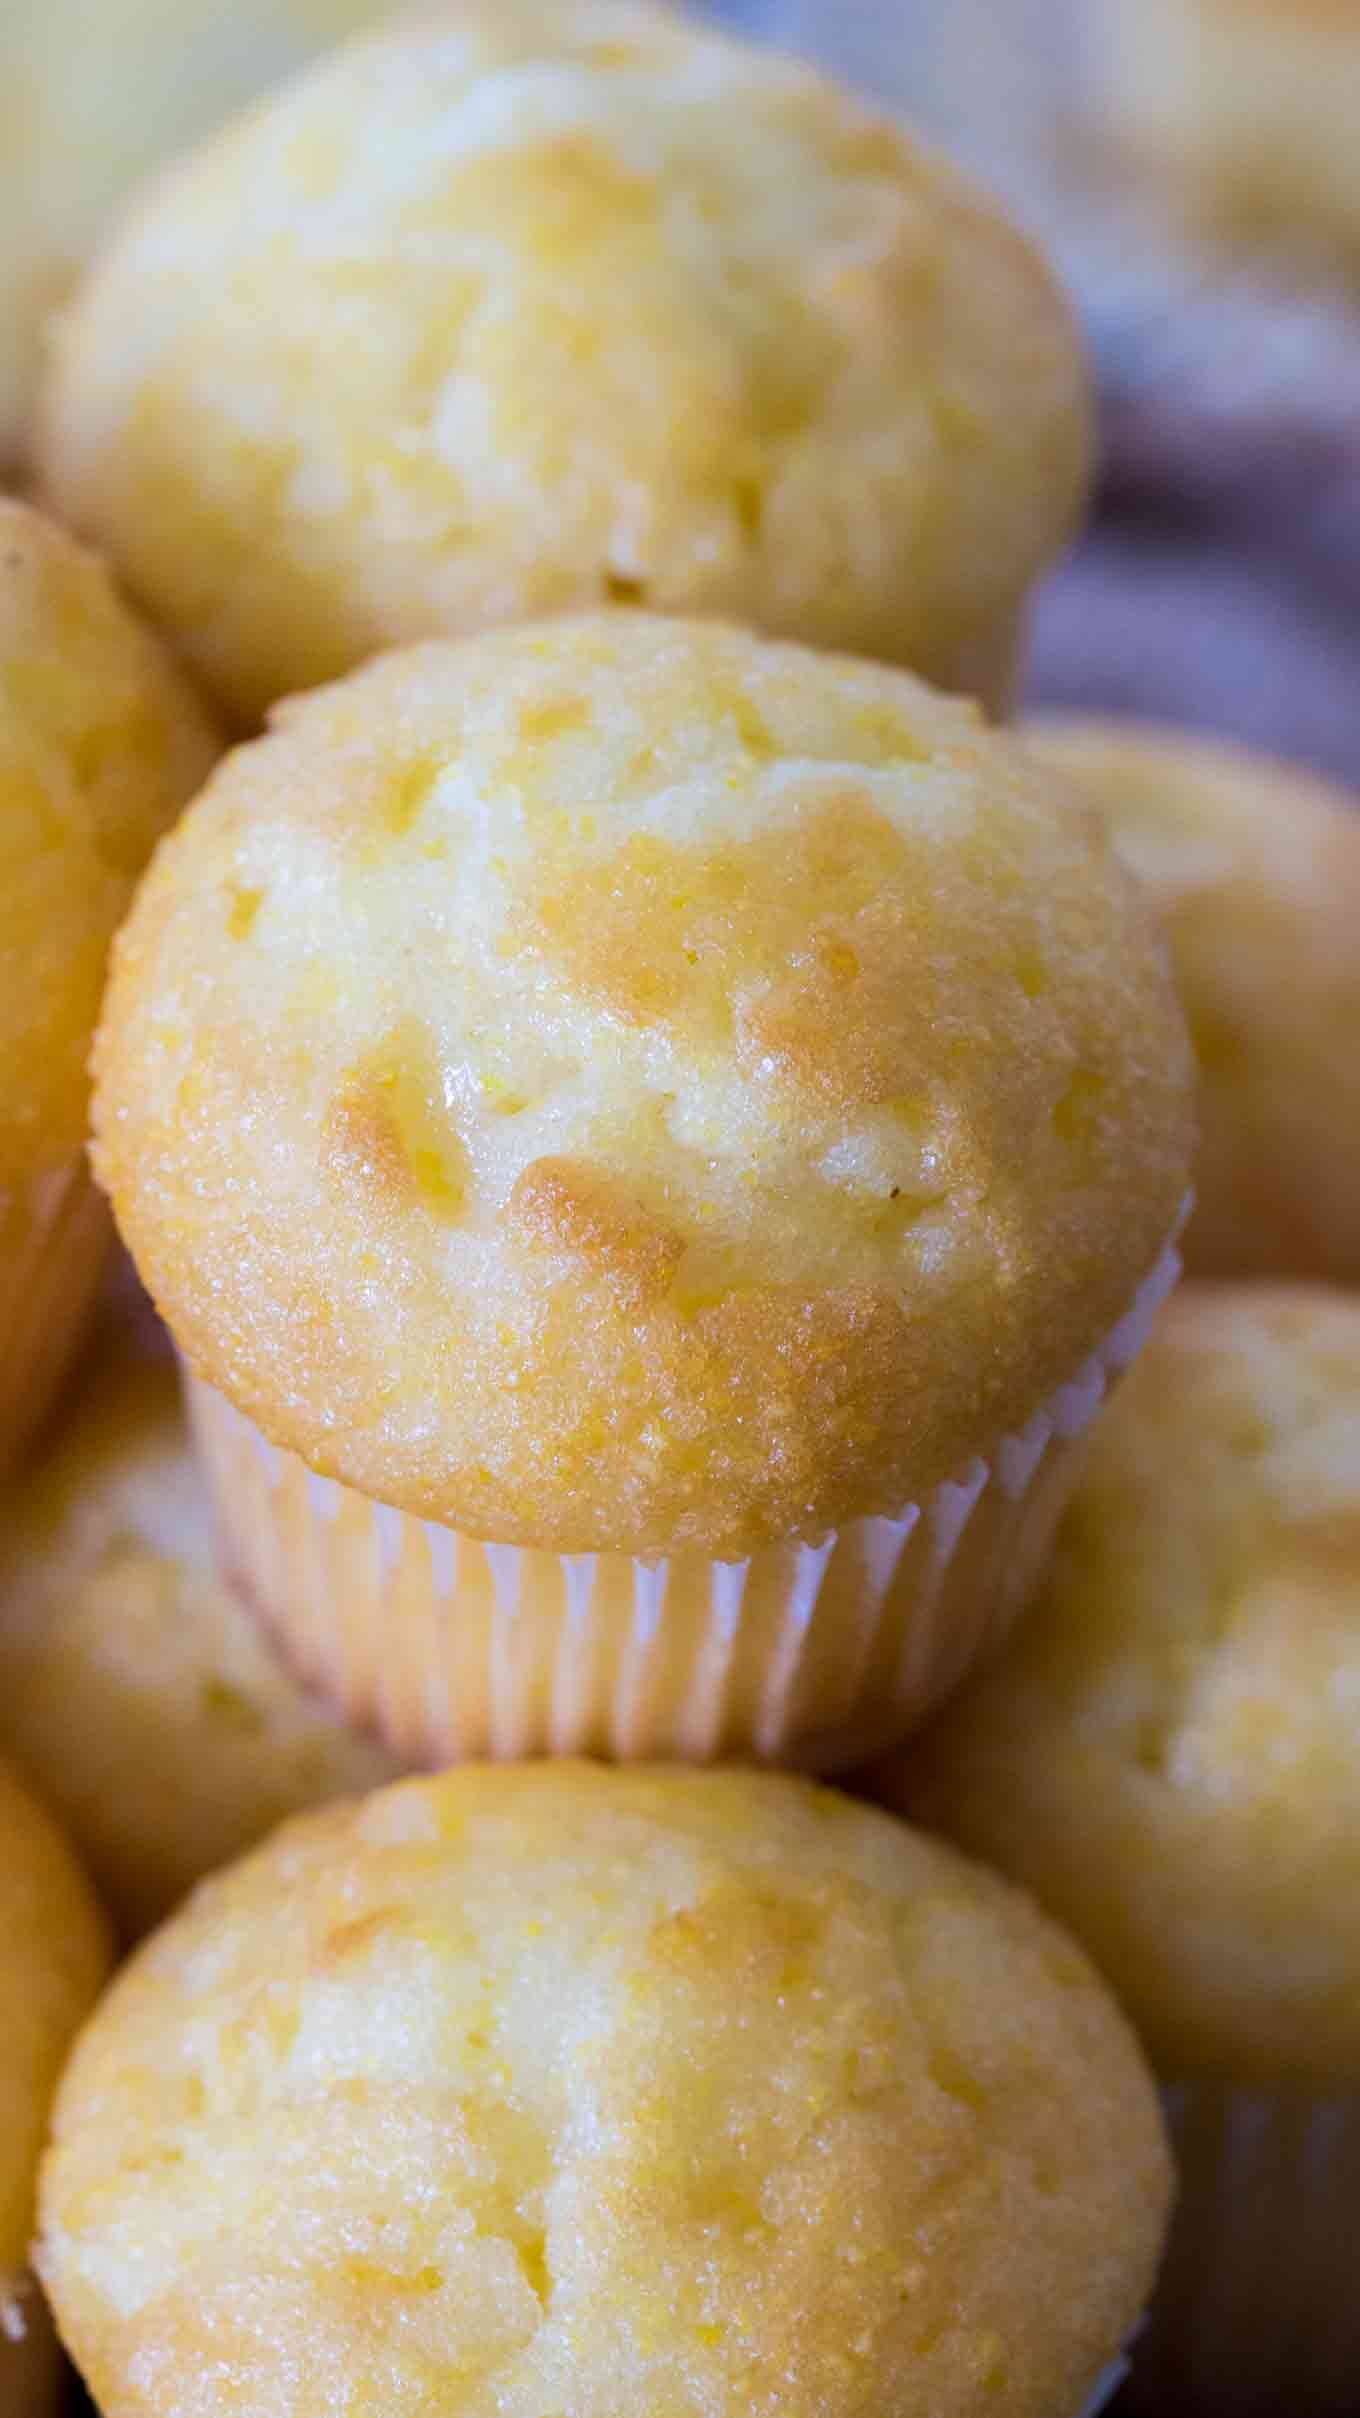 15 of The Best Mini Muffin Recipes - Beat Bake Eat